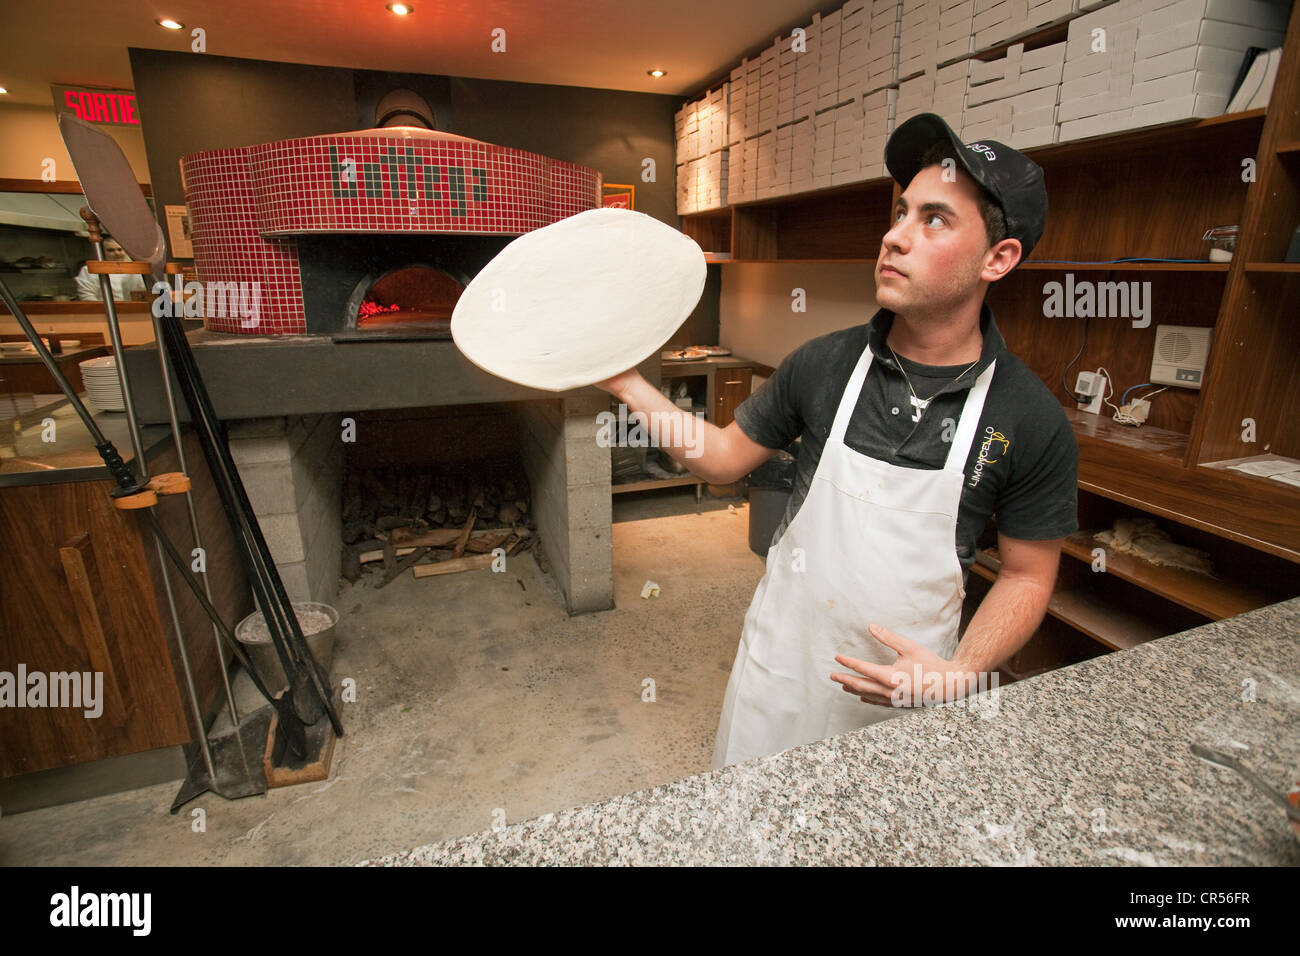 Canada Quebec Province Montreal Little Italy District Bottega Pizzeria pizzaiolo making his pizza in front of the baking oven Stock Photo